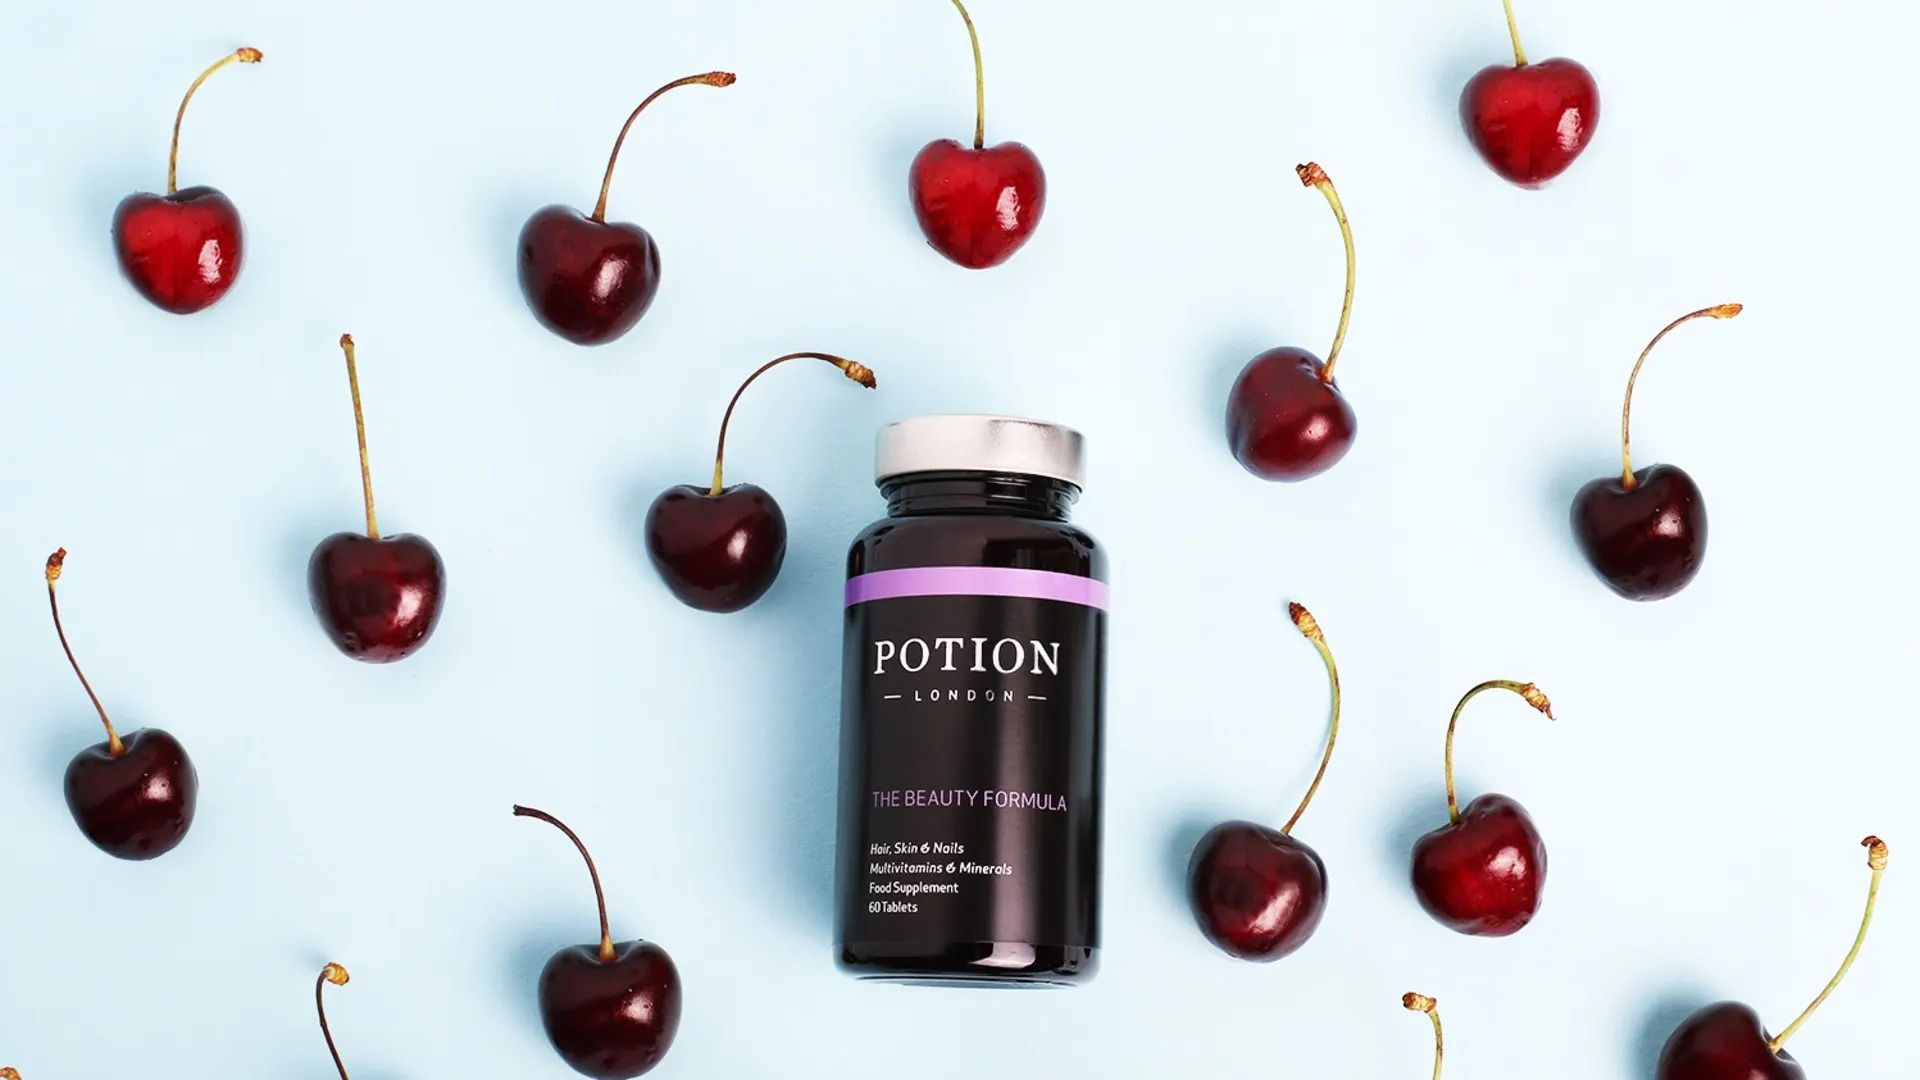 A bottle of Potion London Beauty London surrounded by cherries